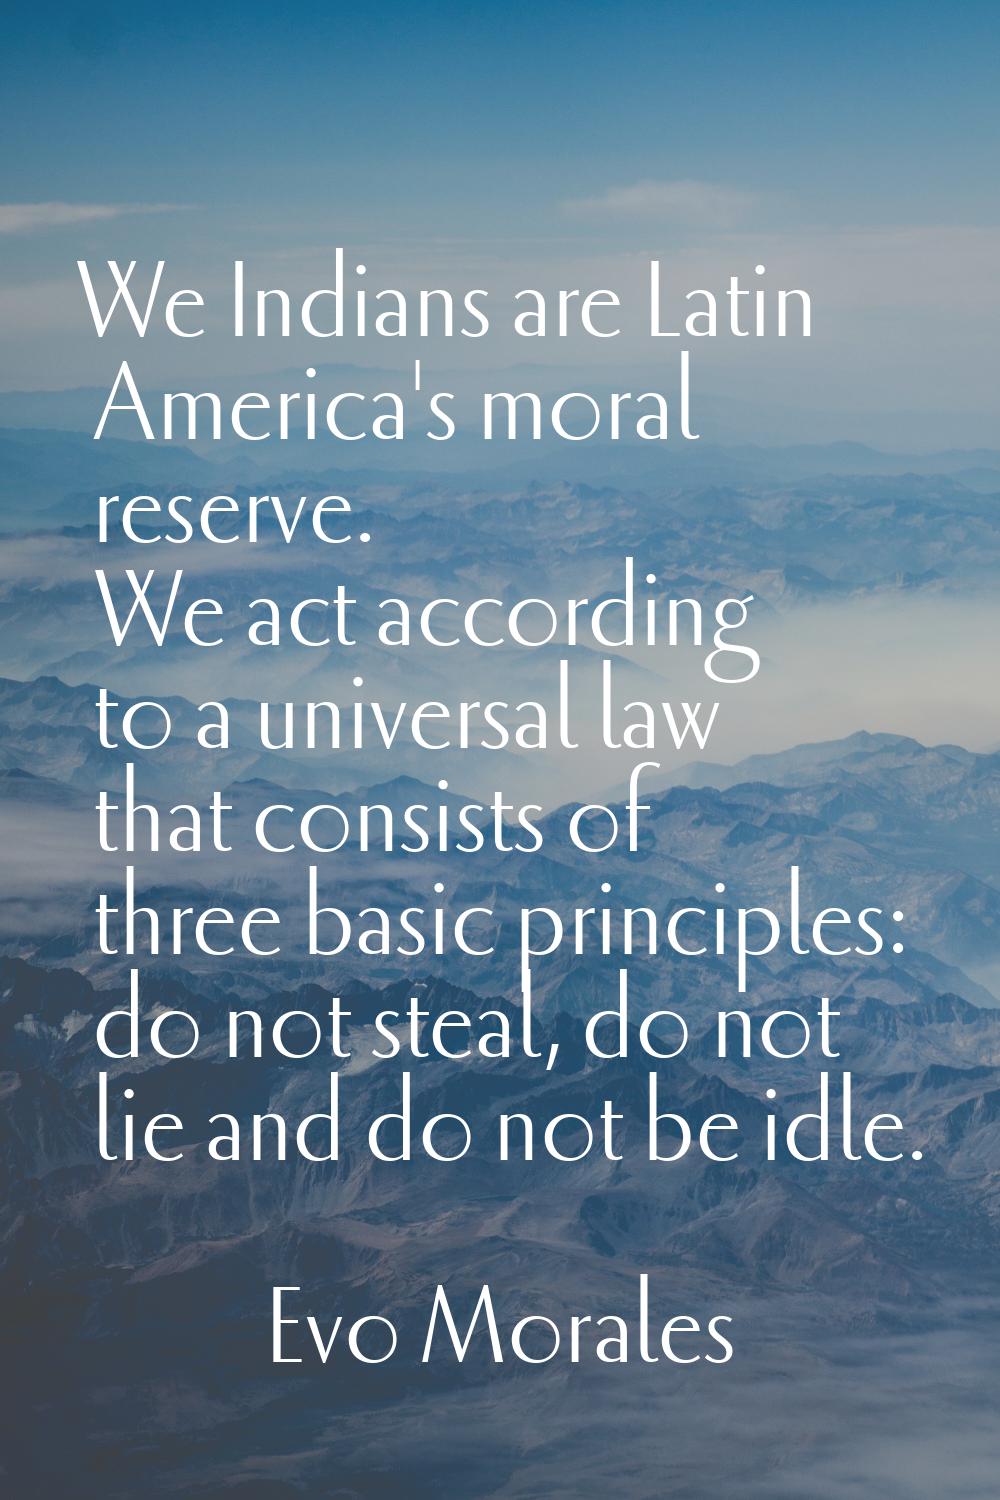 We Indians are Latin America's moral reserve. We act according to a universal law that consists of 